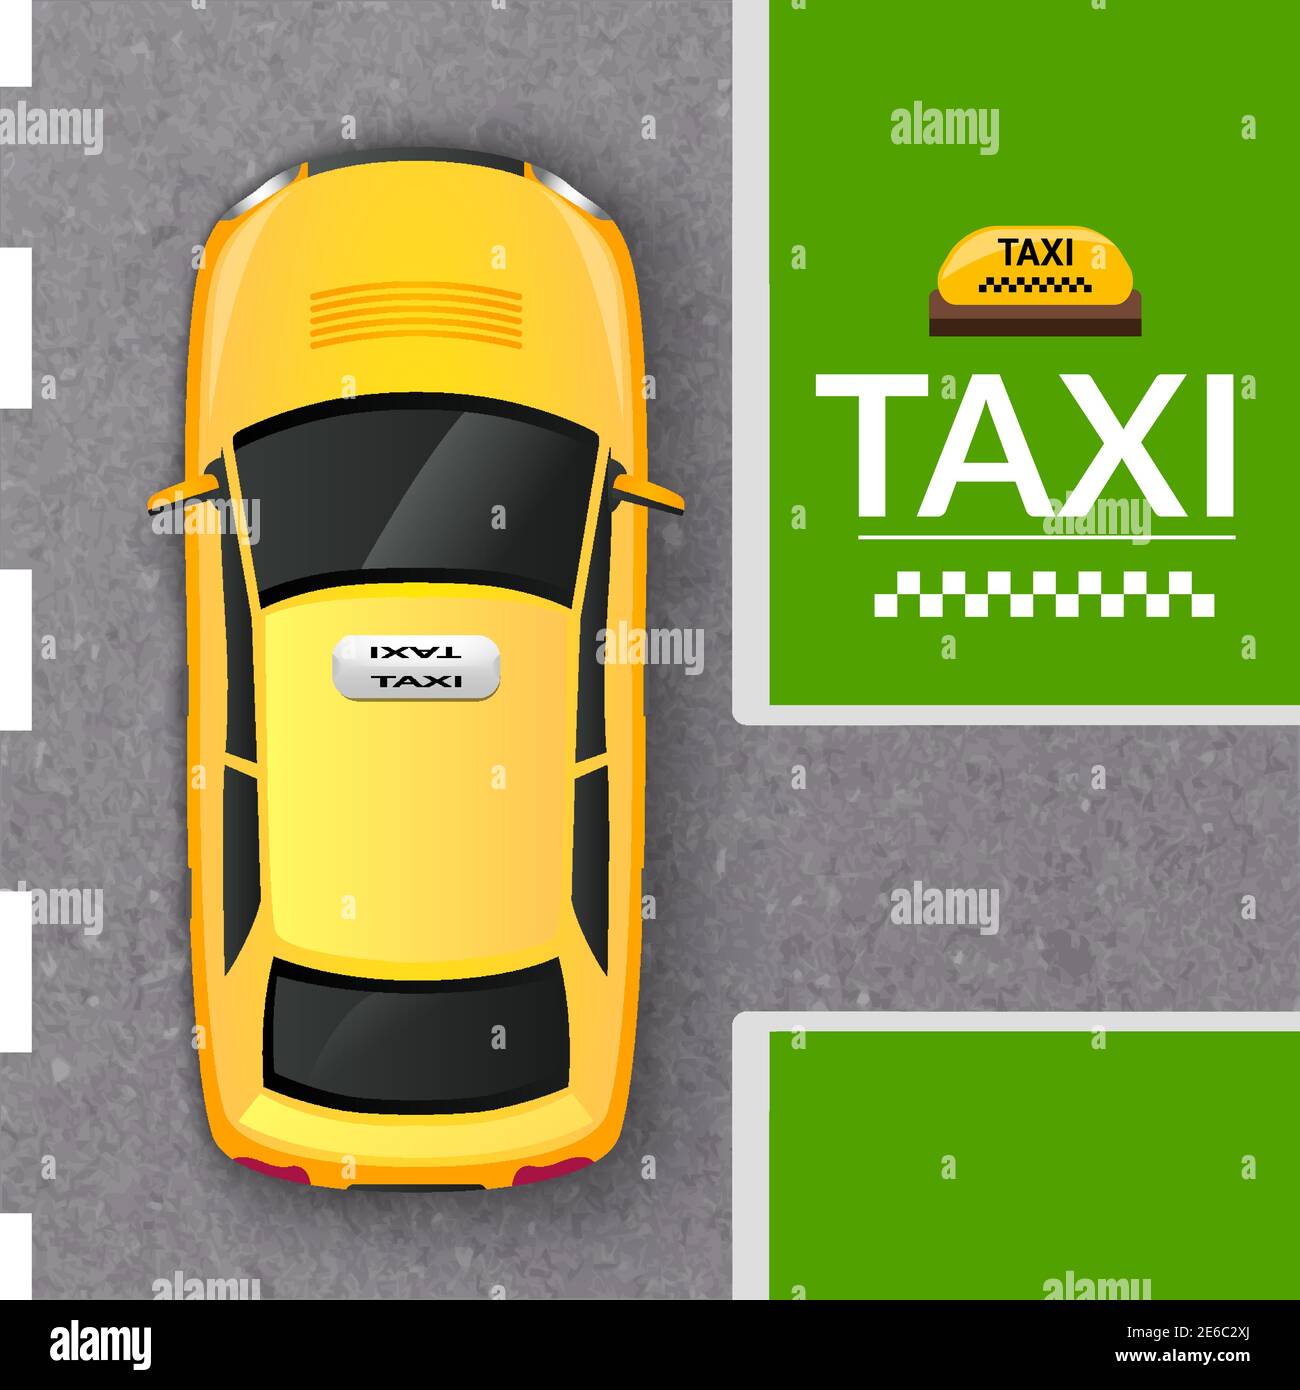 Public transportation company taxicab in the street top view from above flat pictogram abstract vector illustration Stock Vector